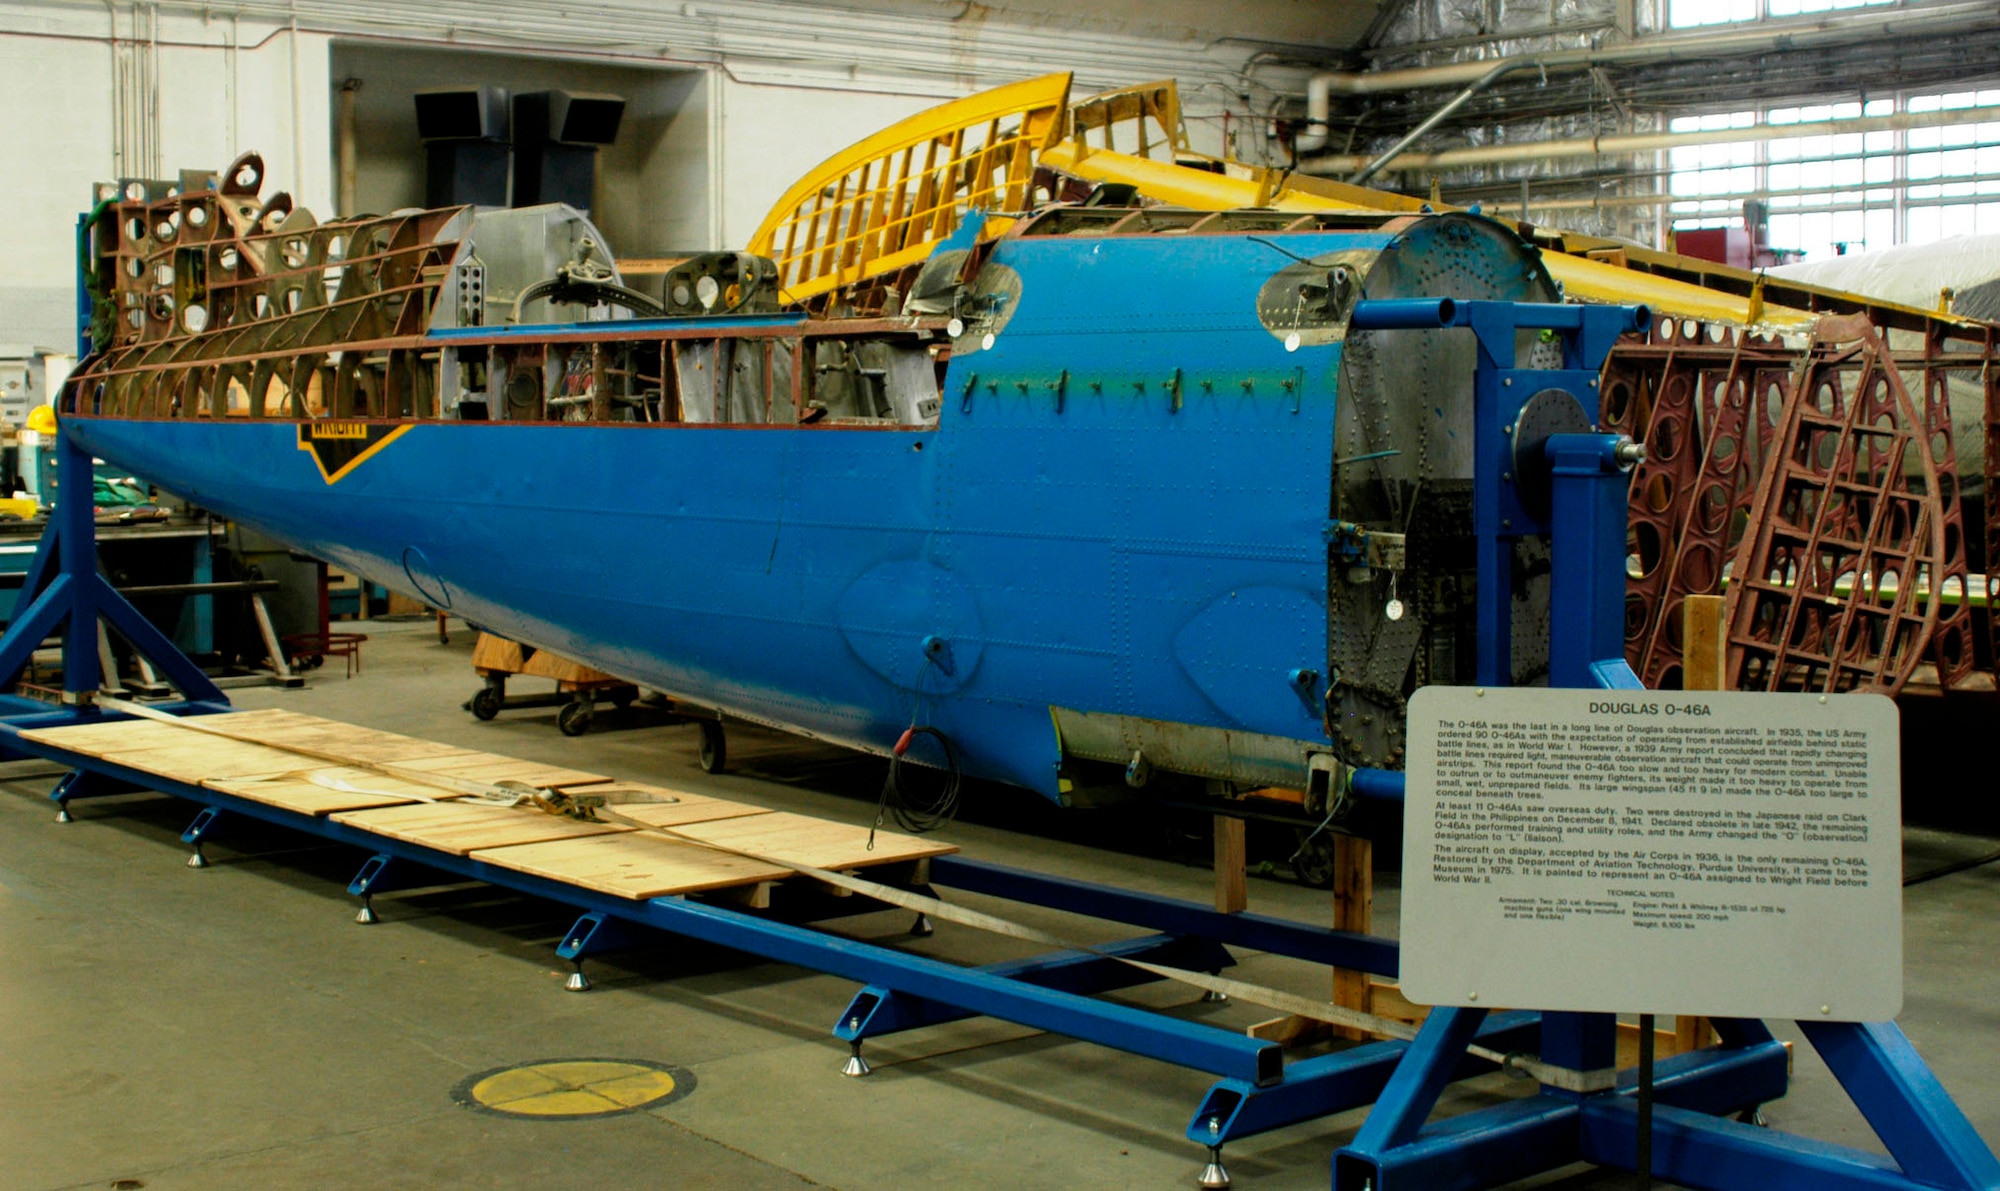 DAYTON, Ohio (02/2010) -- O-46A in the Restoration Hangar at the National Museum of the U.S. Air Force. (U.S. Air Force photo) 
